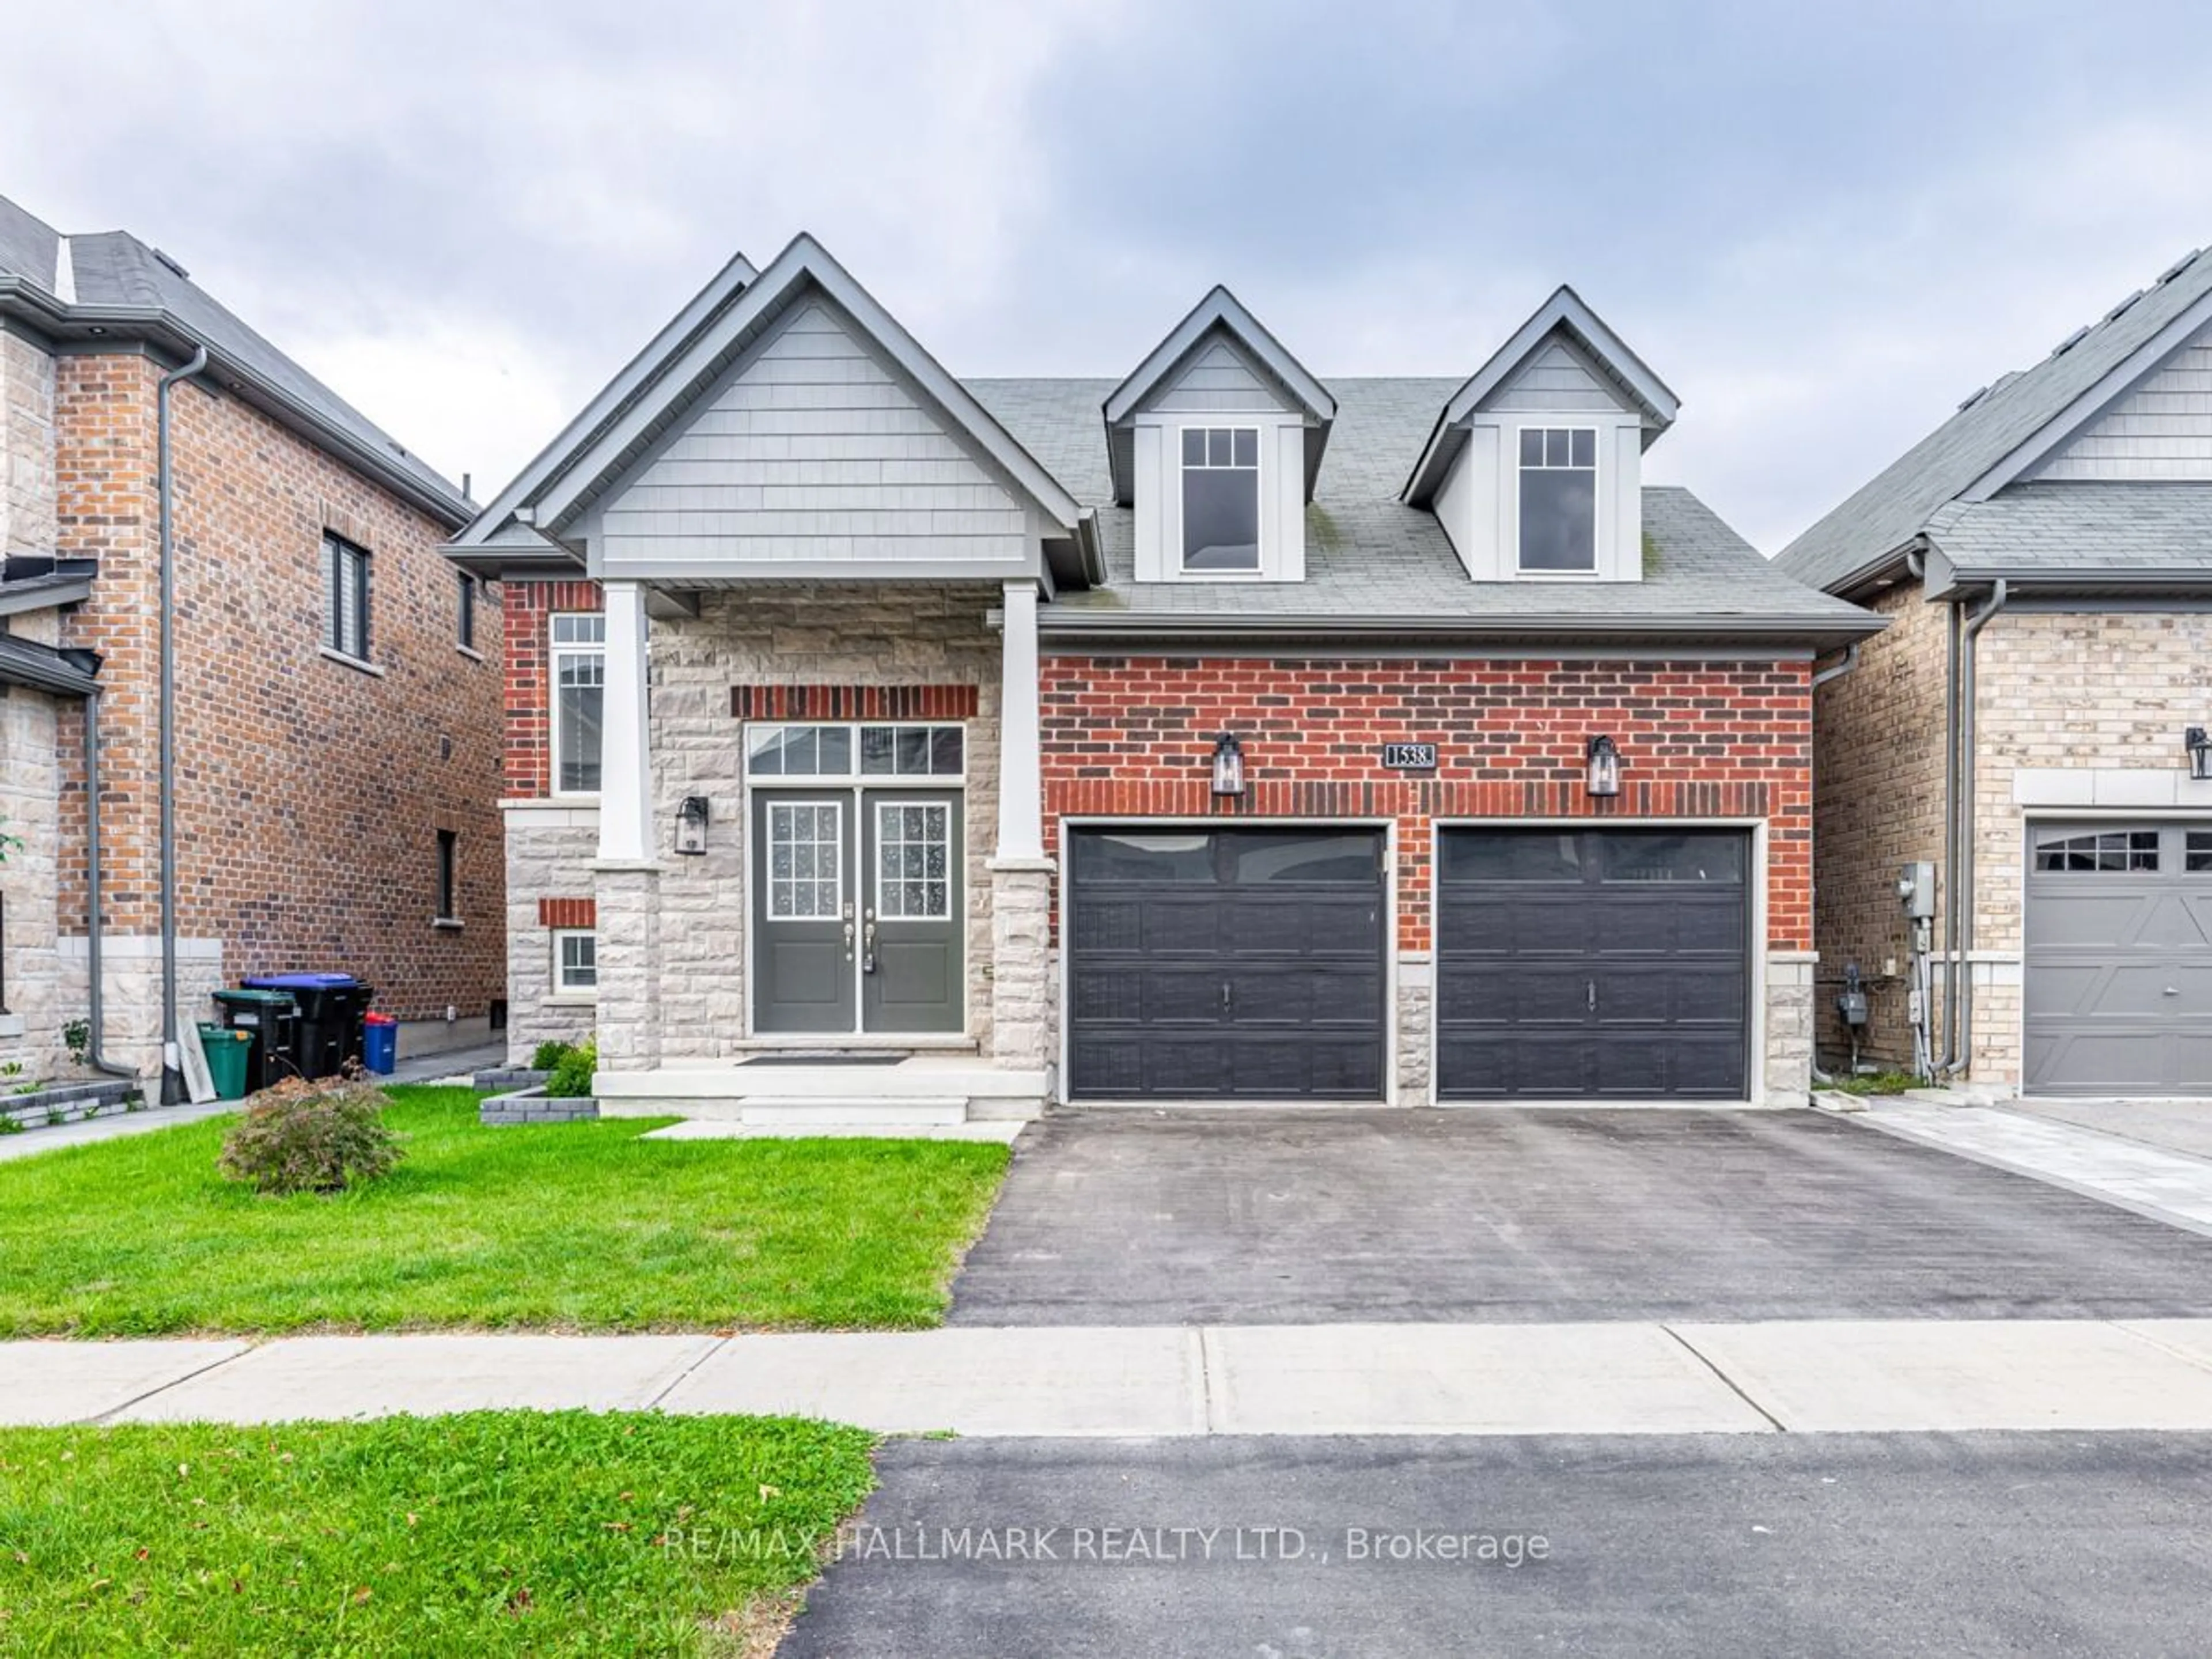 Home with brick exterior material for 1538 Farrow Cres, Innisfil Ontario L9S 0L6